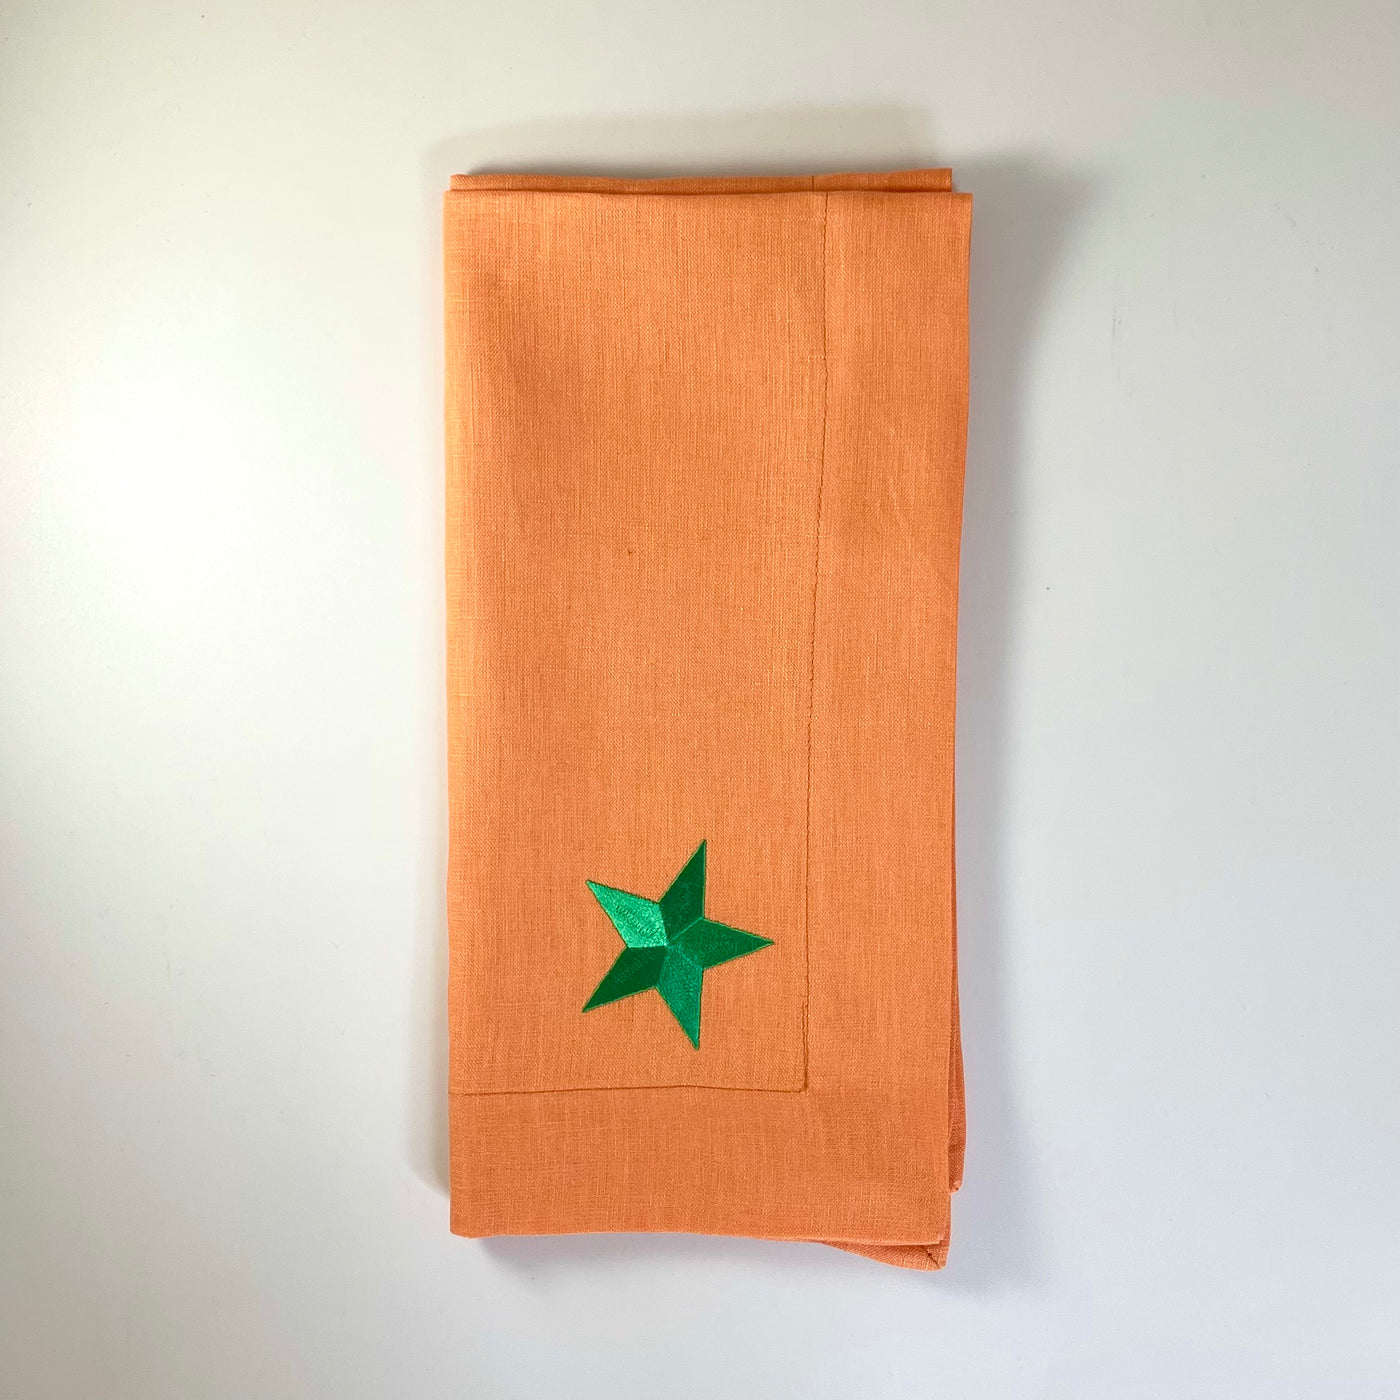 Orange and Green Linen Napkin with Embroidered Star